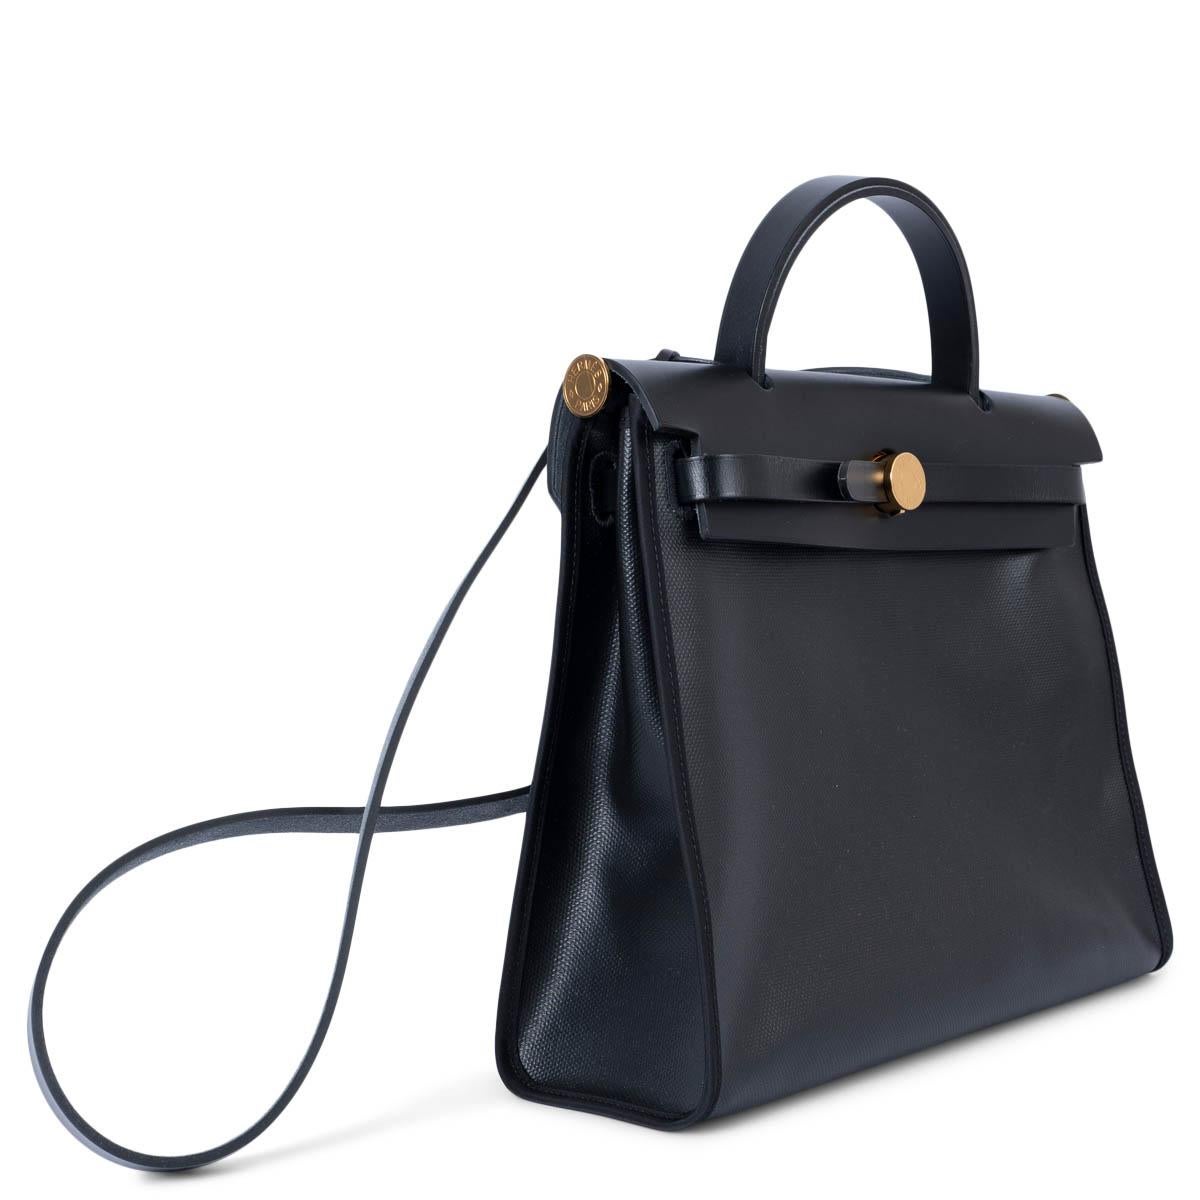 100% authentic Hermès Herbag Zip 31 in black coated Toile H Berline and black Vache Hunter leather with gold-tone hardware. The design features an exterior zip pocket on the back, has tonal stitching, front flap, clochette with lock and two keys,